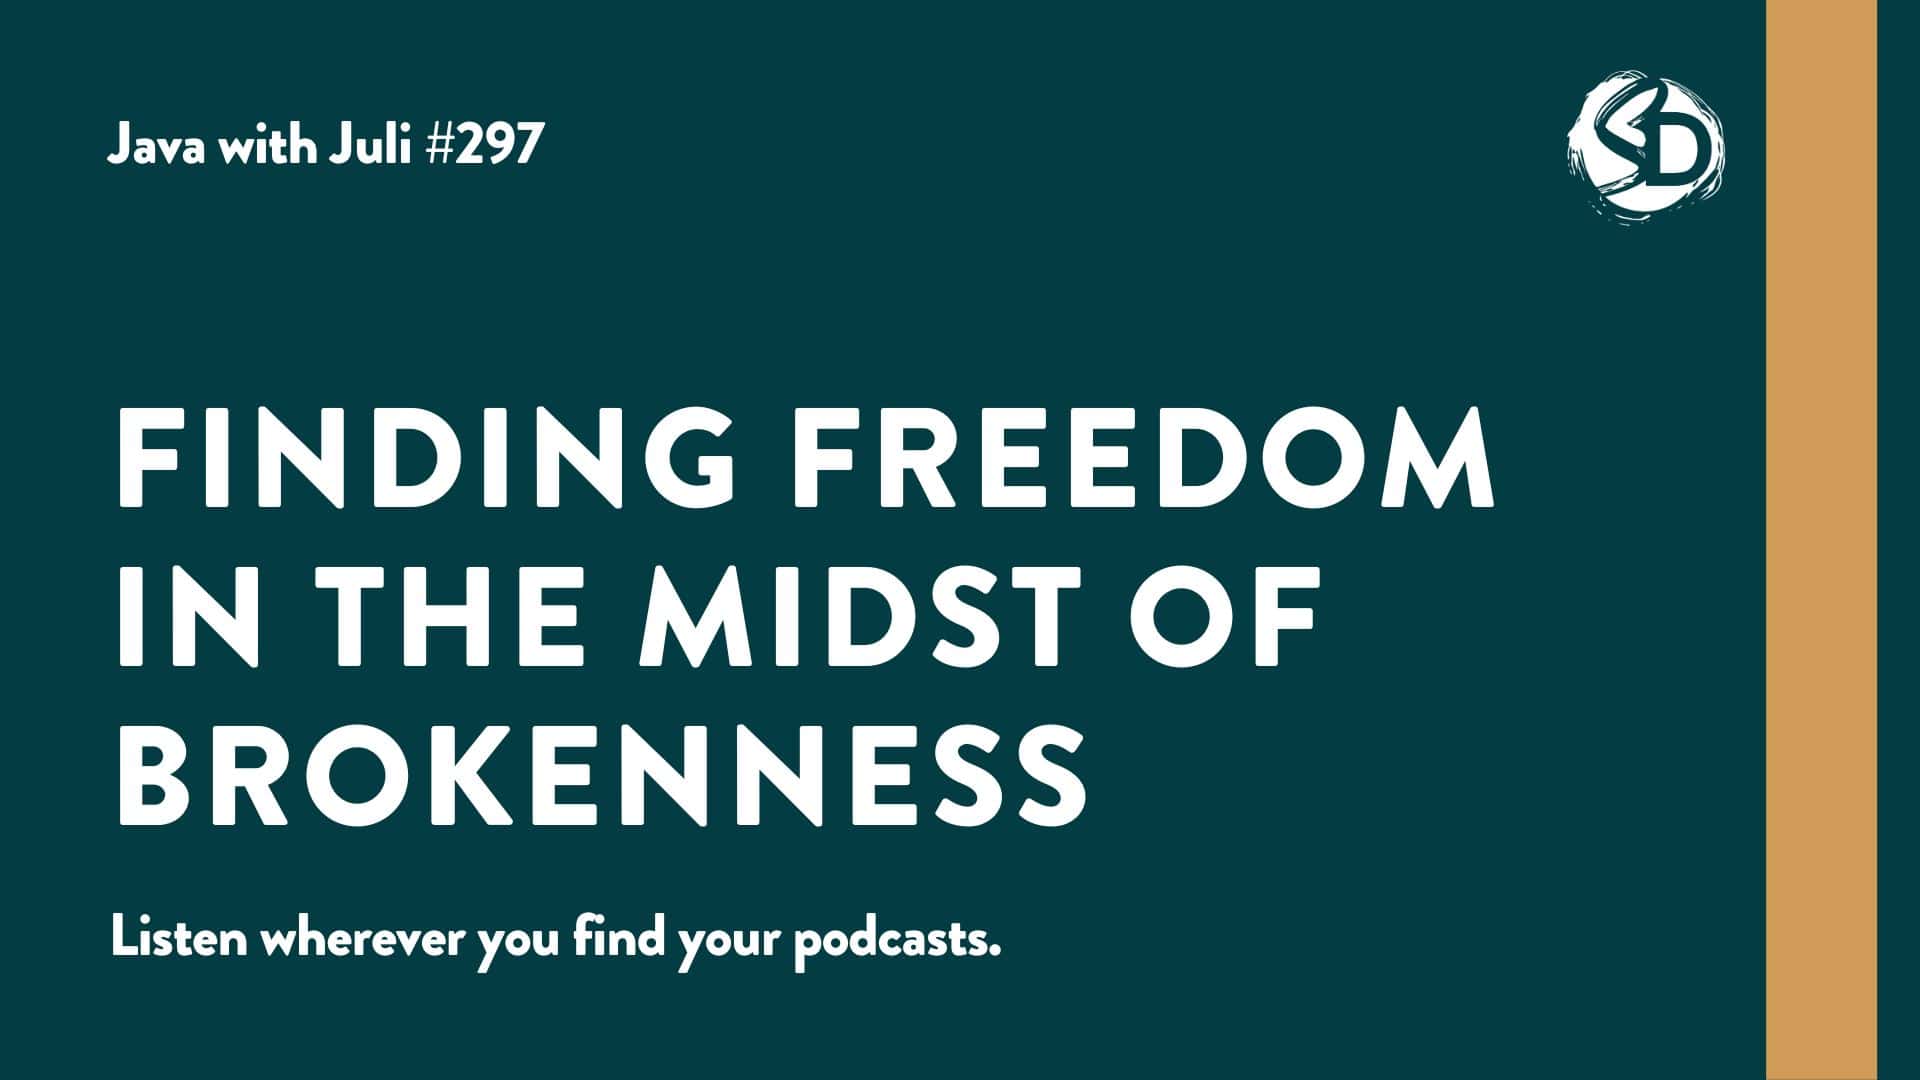 #297: Finding Freedom in the Midst of Brokenness